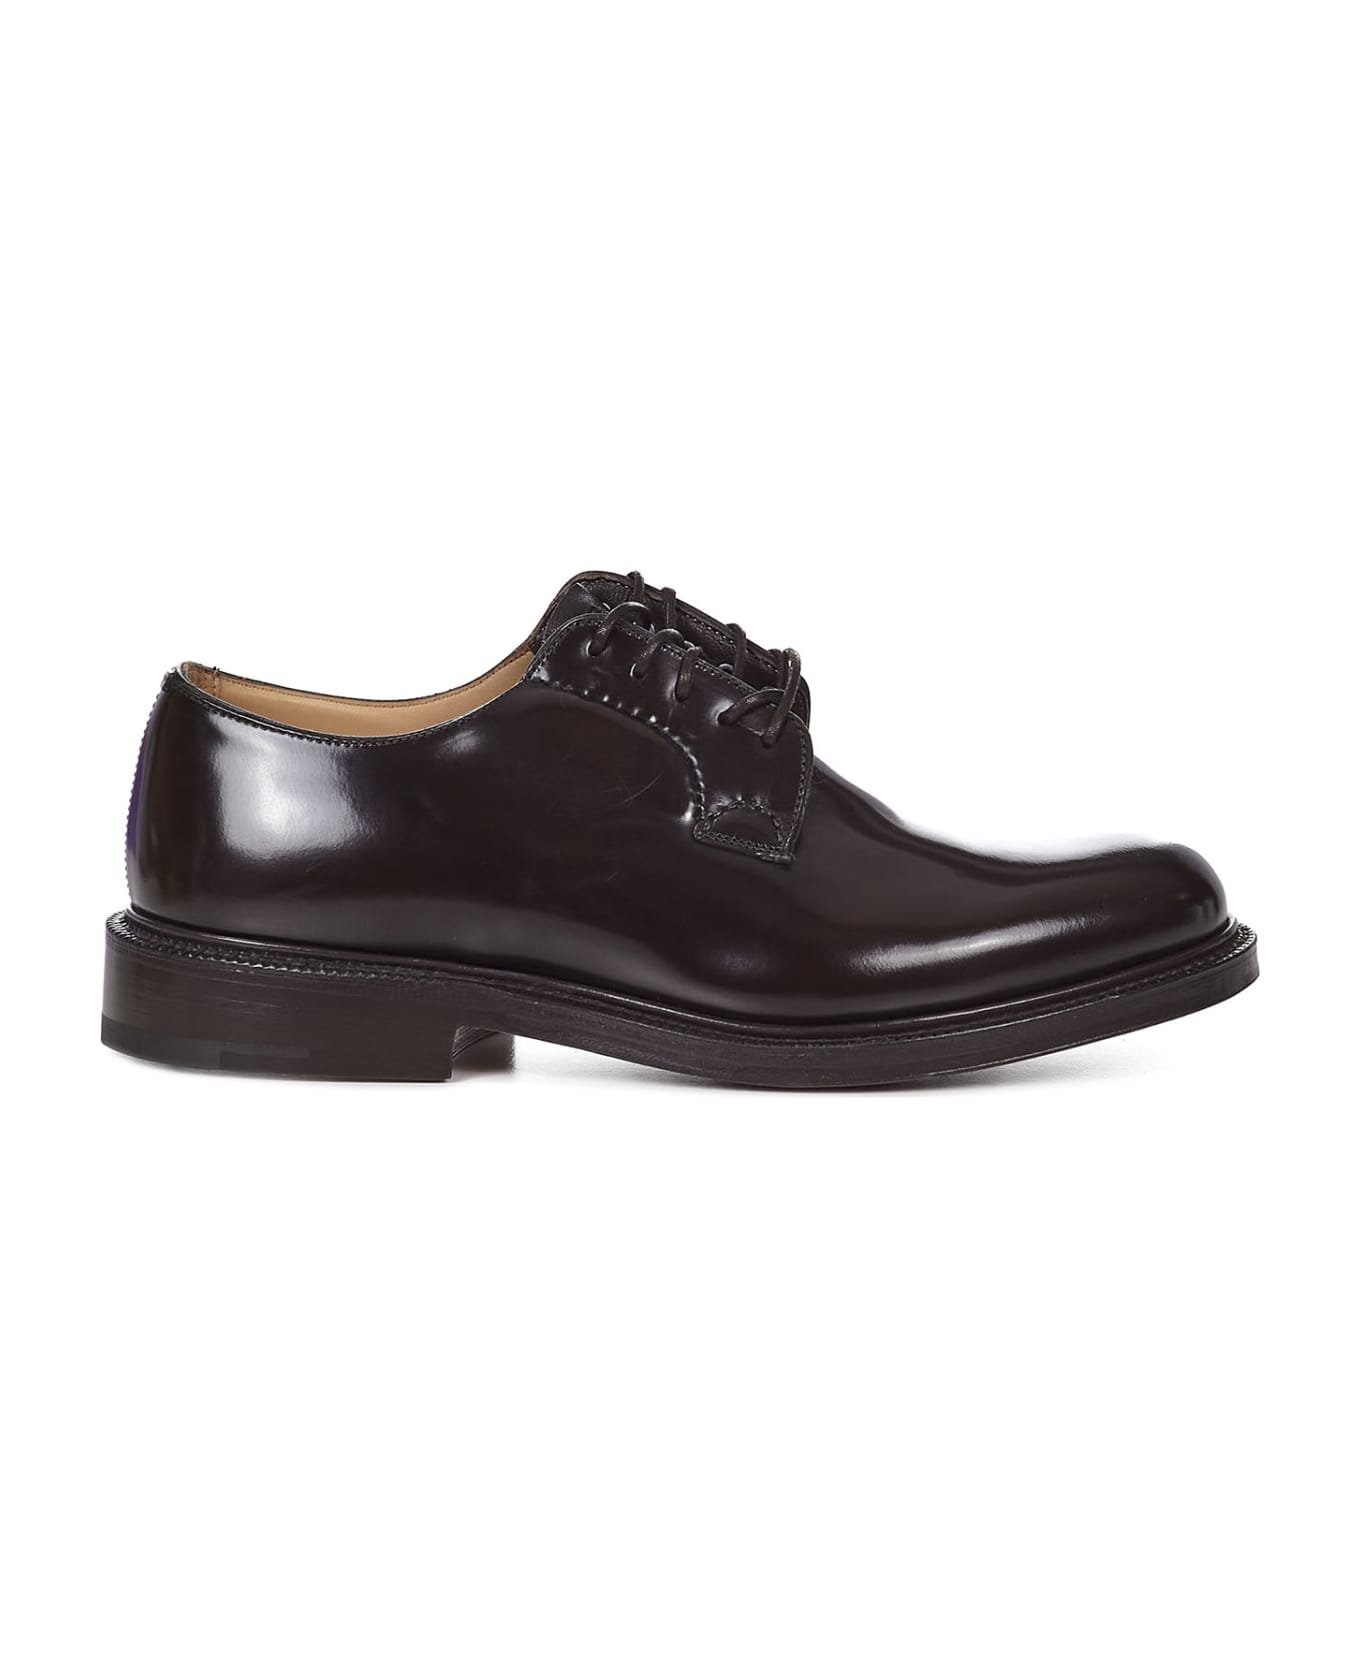 Church's Derby Shoes - Brown